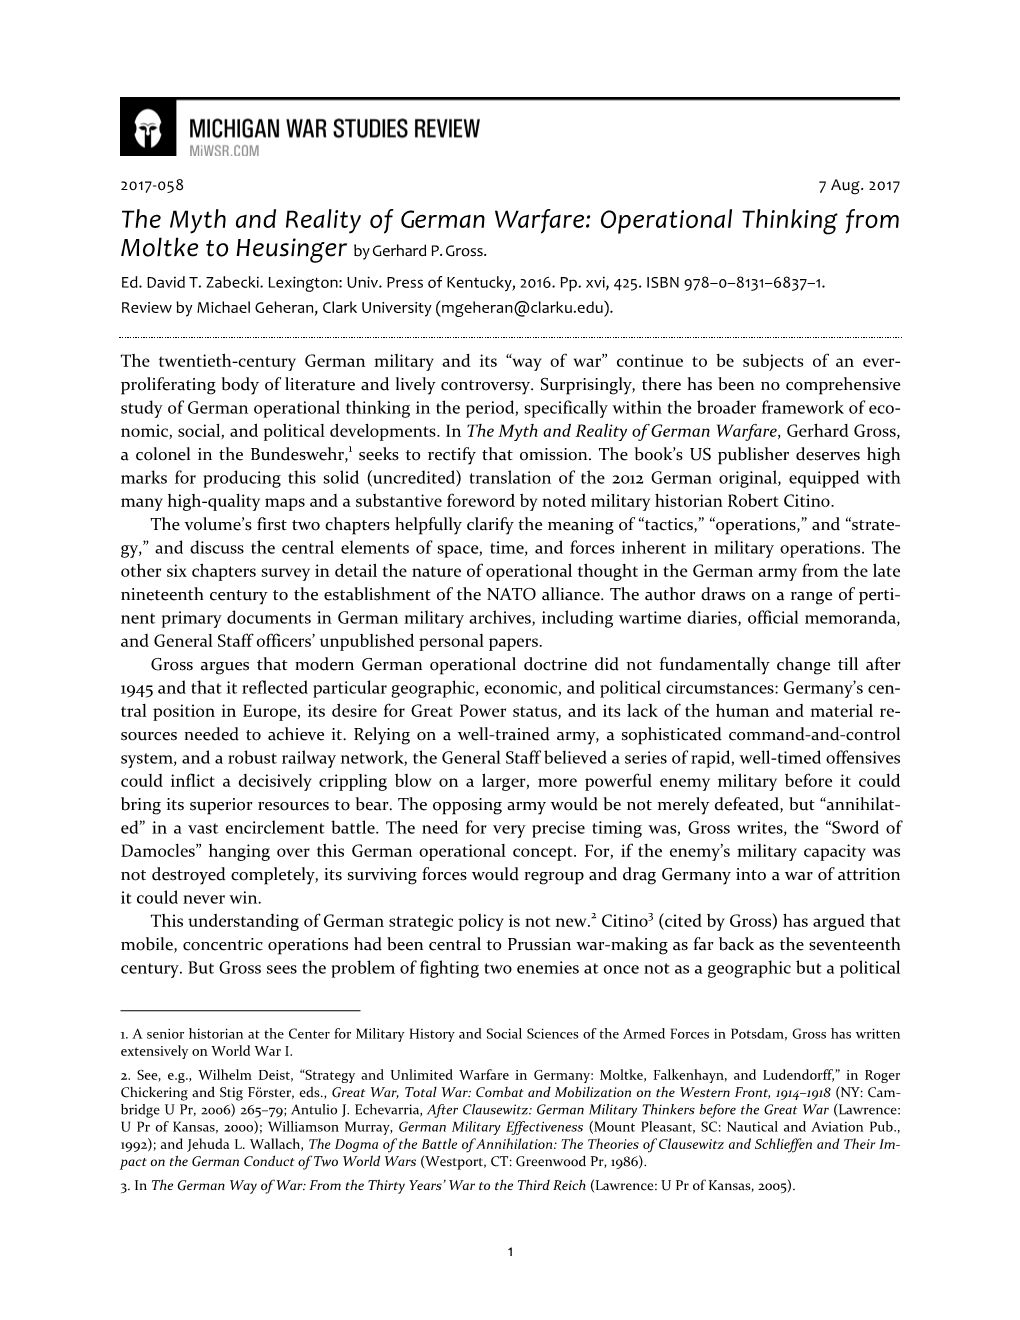 The Myth and Reality of German Warfare: Operational Thinking from Moltke to Heusinger by Gerhard P